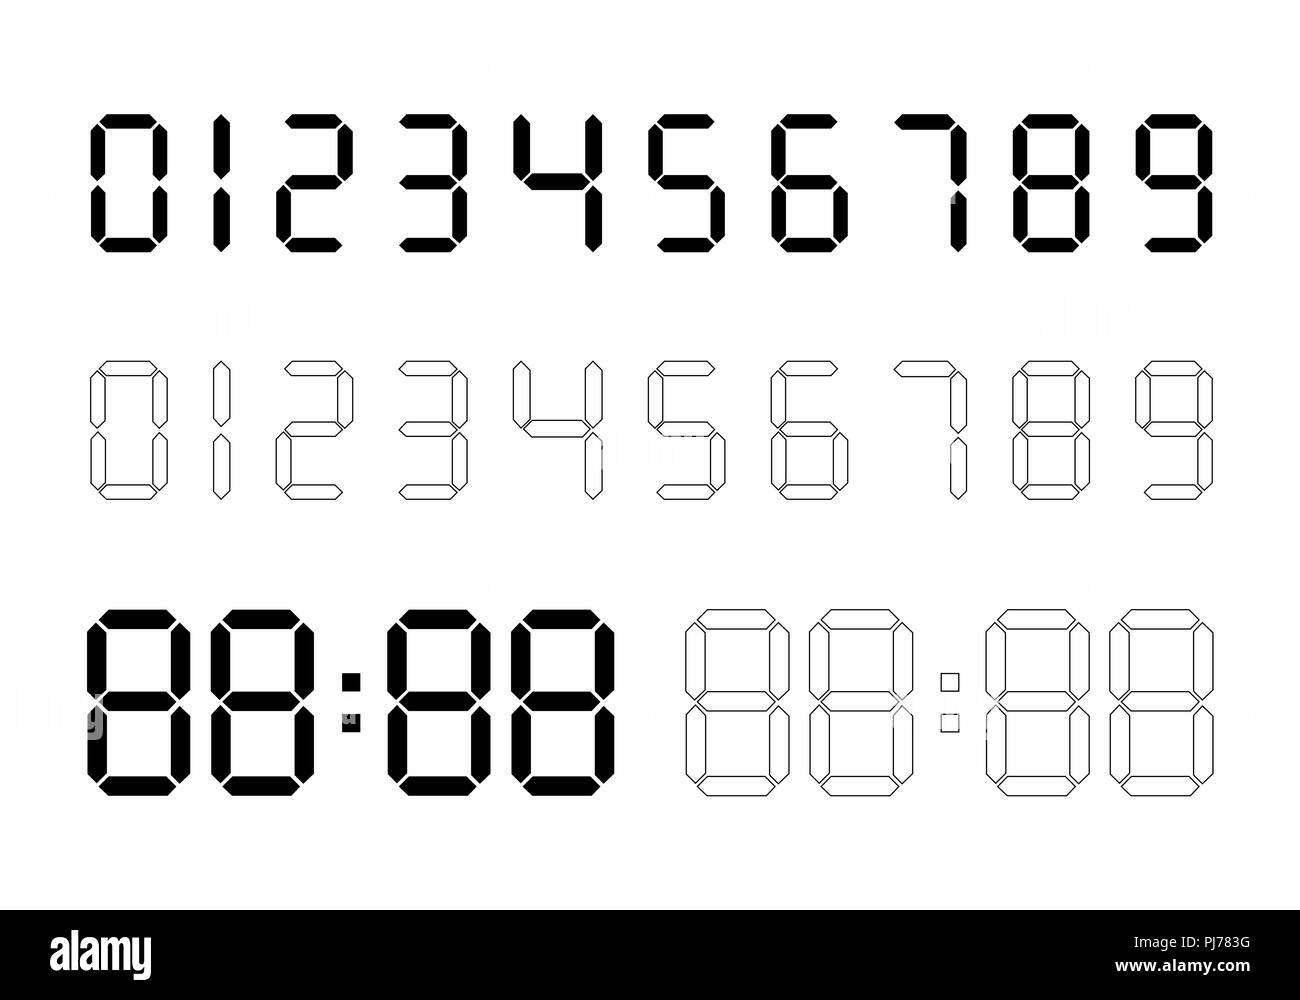 Set of digital numbers on white background Stock Vector